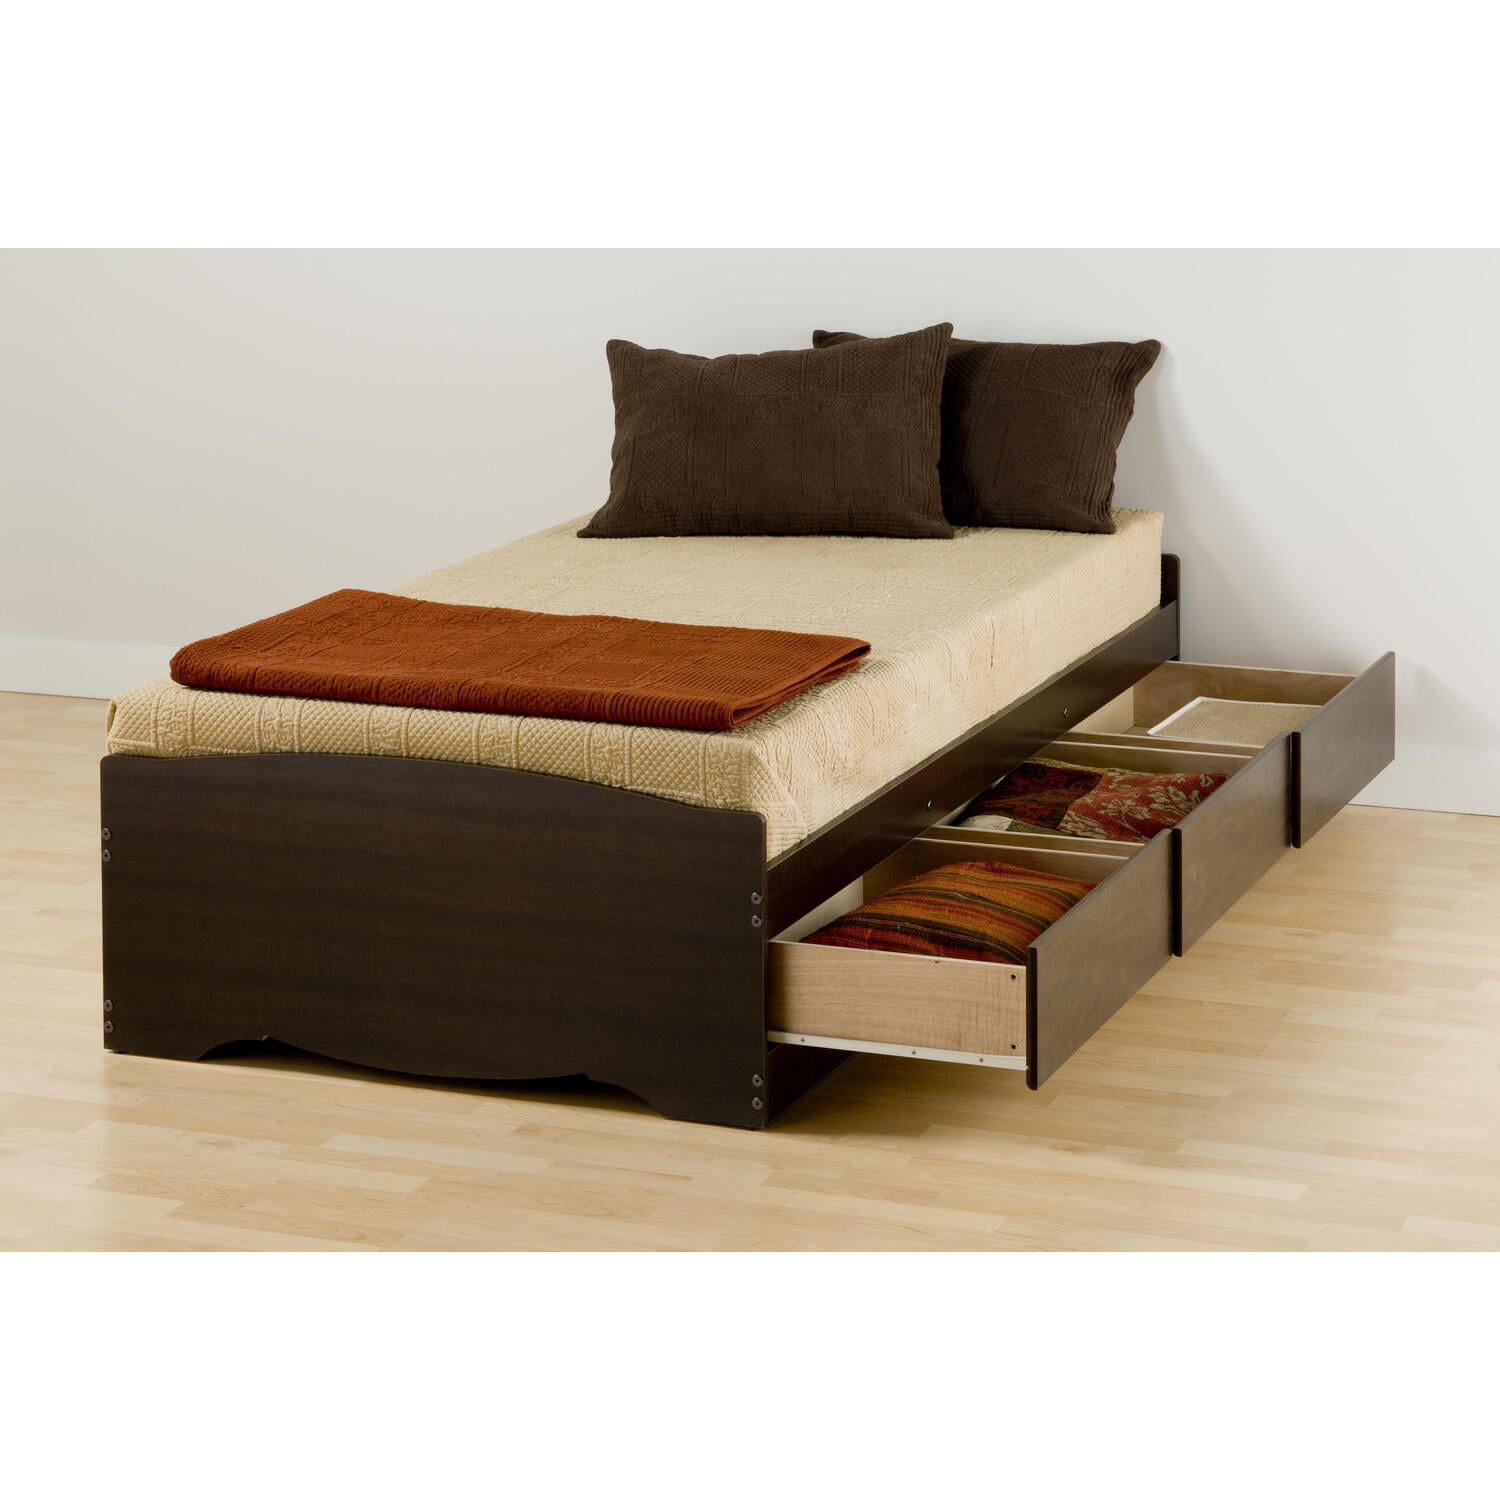 Prepac Mate S Platform Storage Bed With, Twin Xl Platform Bed With Bookcase Headboard 3 Storage Drawers